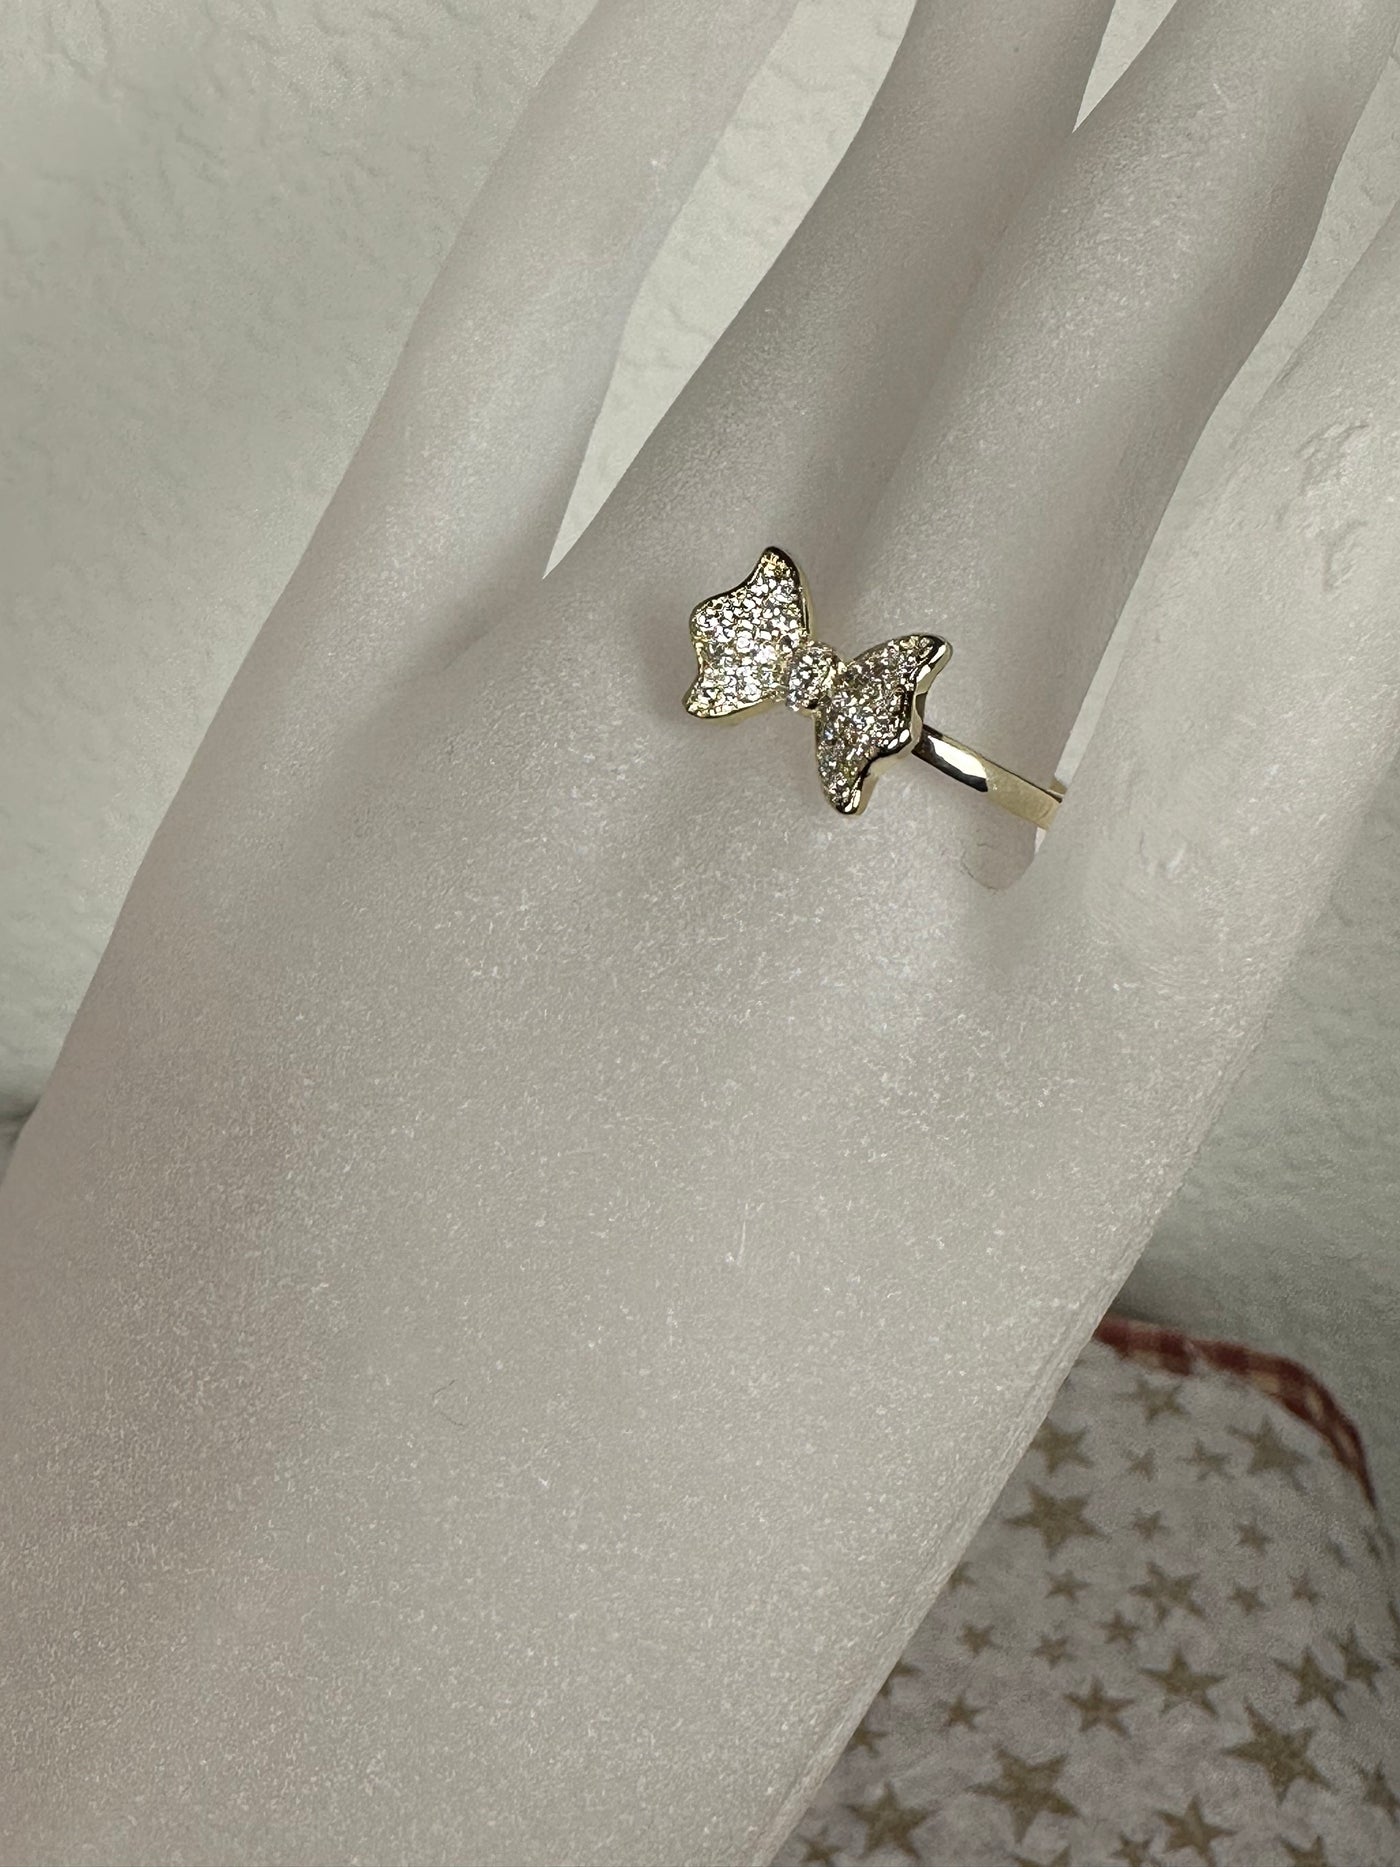 Pave Set Cubic Zirconia Bow Ring in Yellow Gold Tone with Sizes